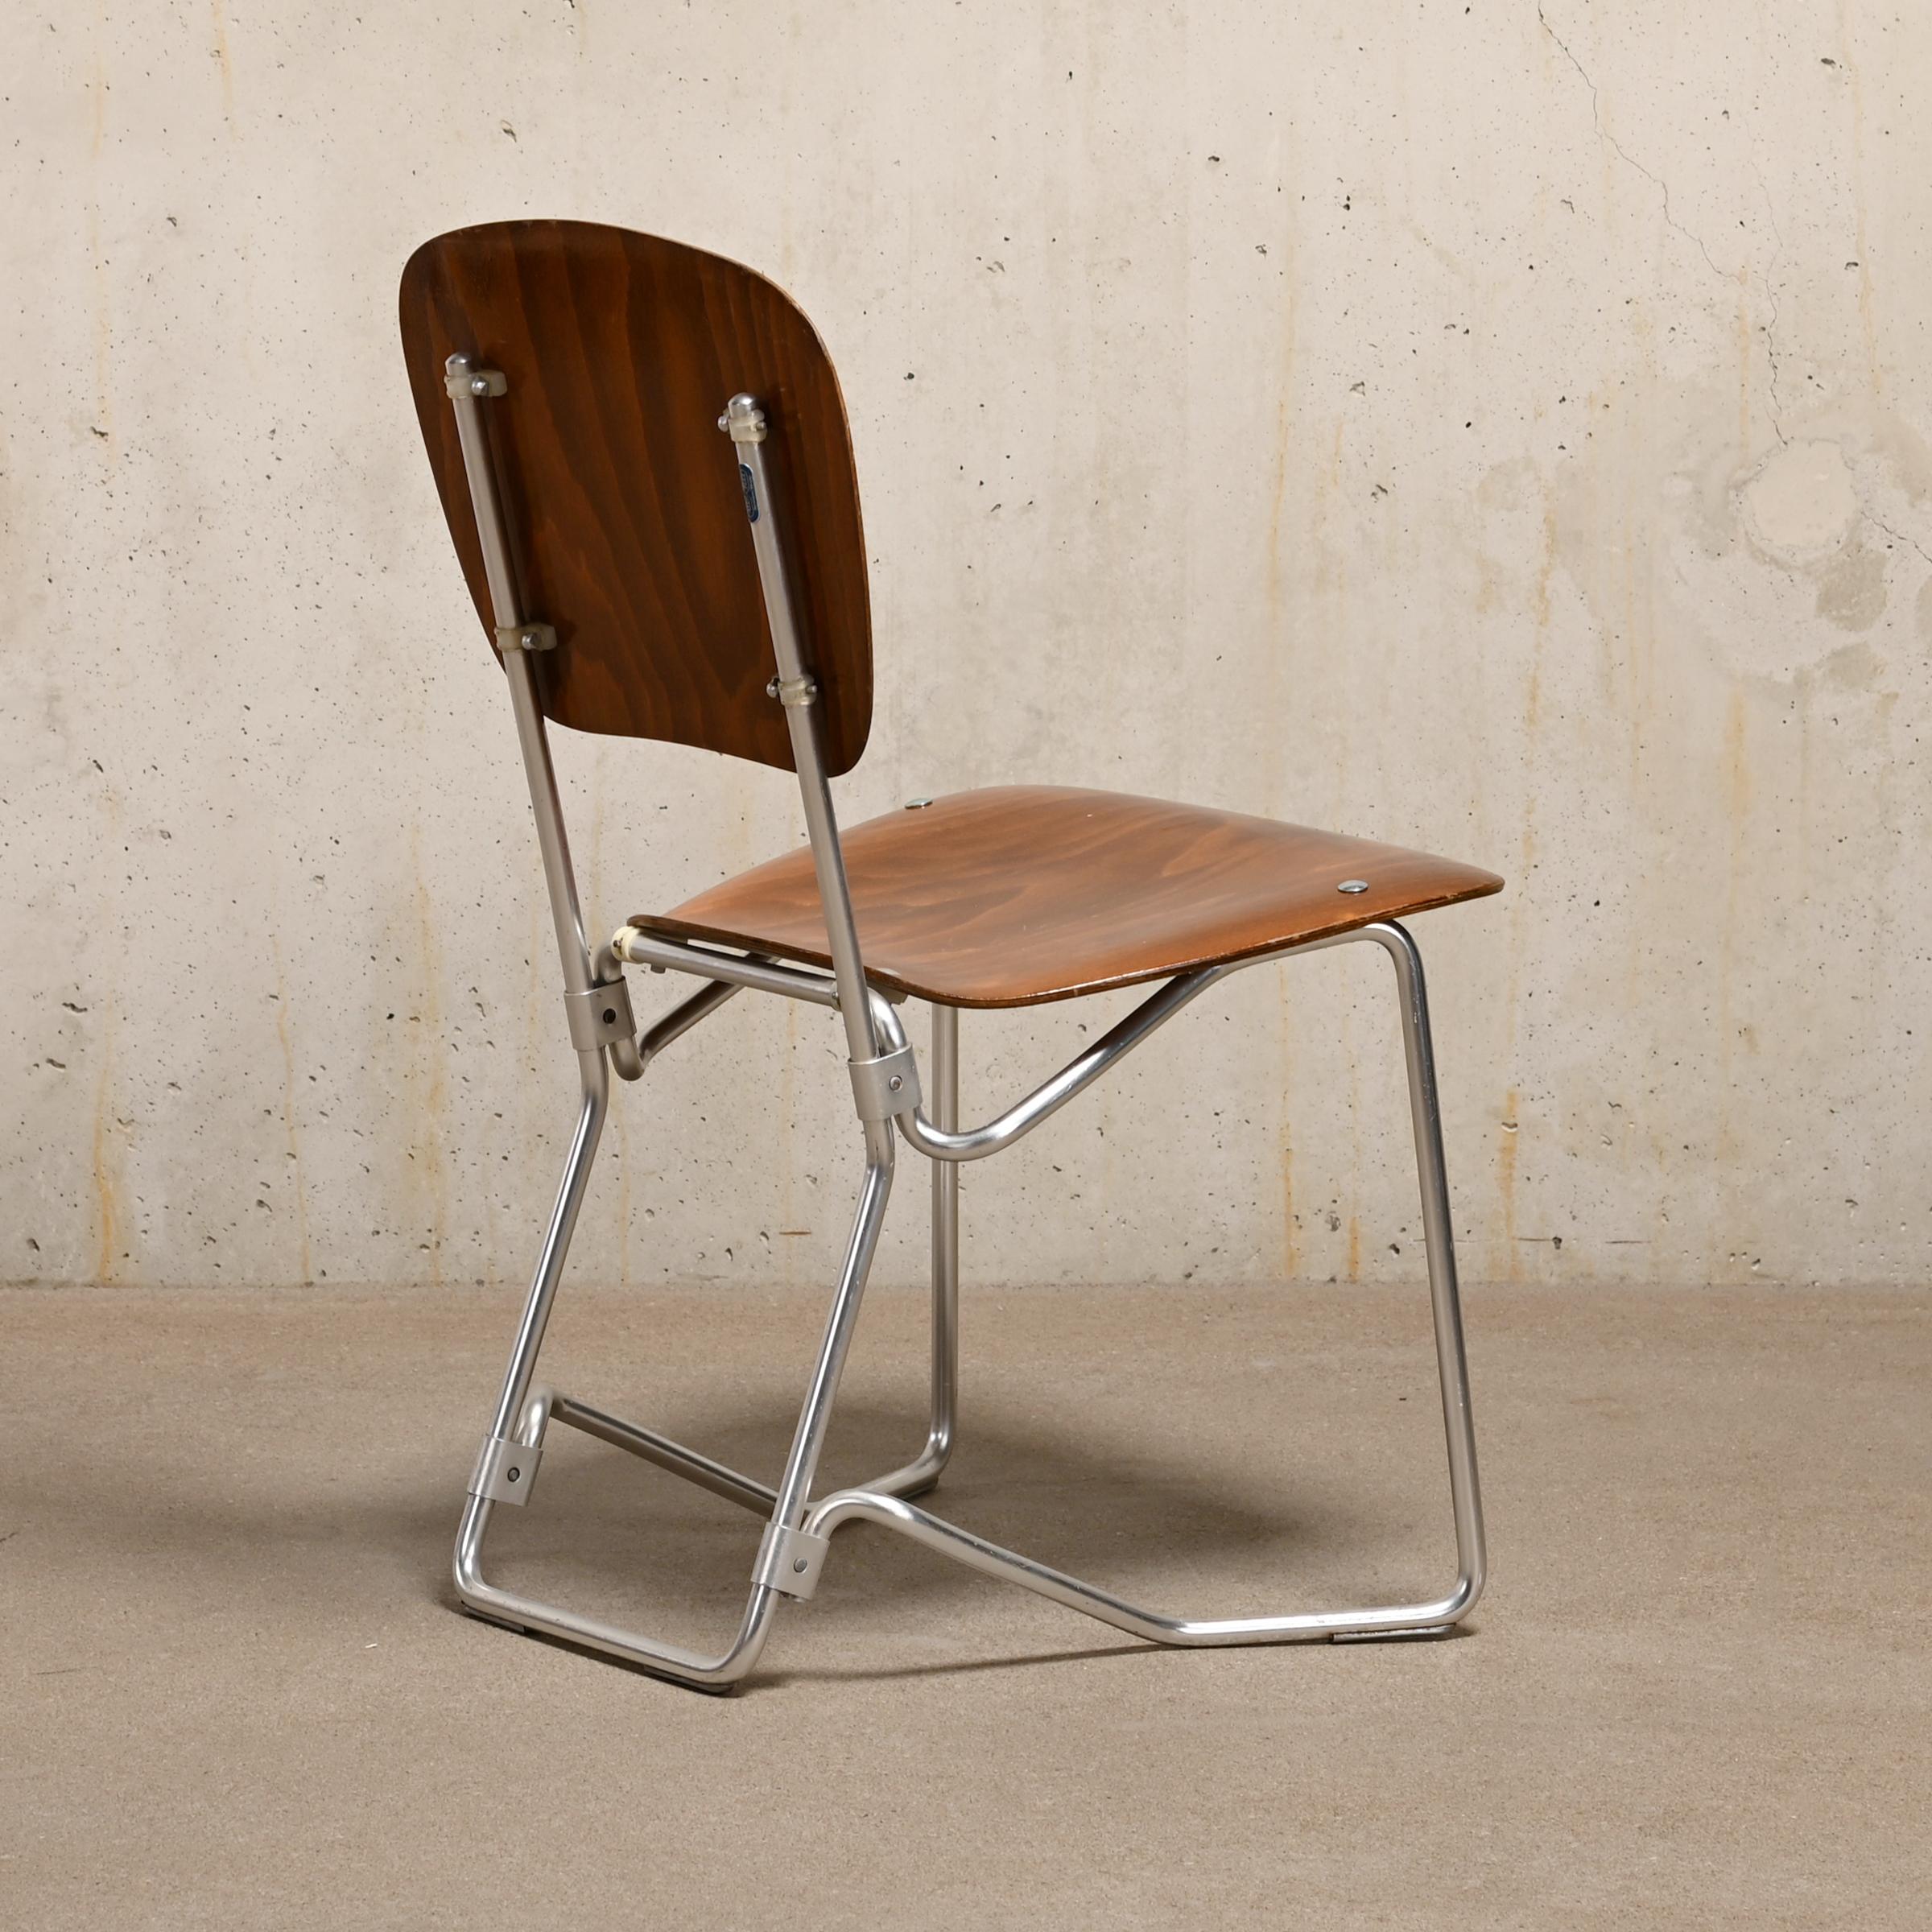 Aluminum Armin Wirth Aluflex Folding Chairs in stained plywood for Philipp Zieringer KG